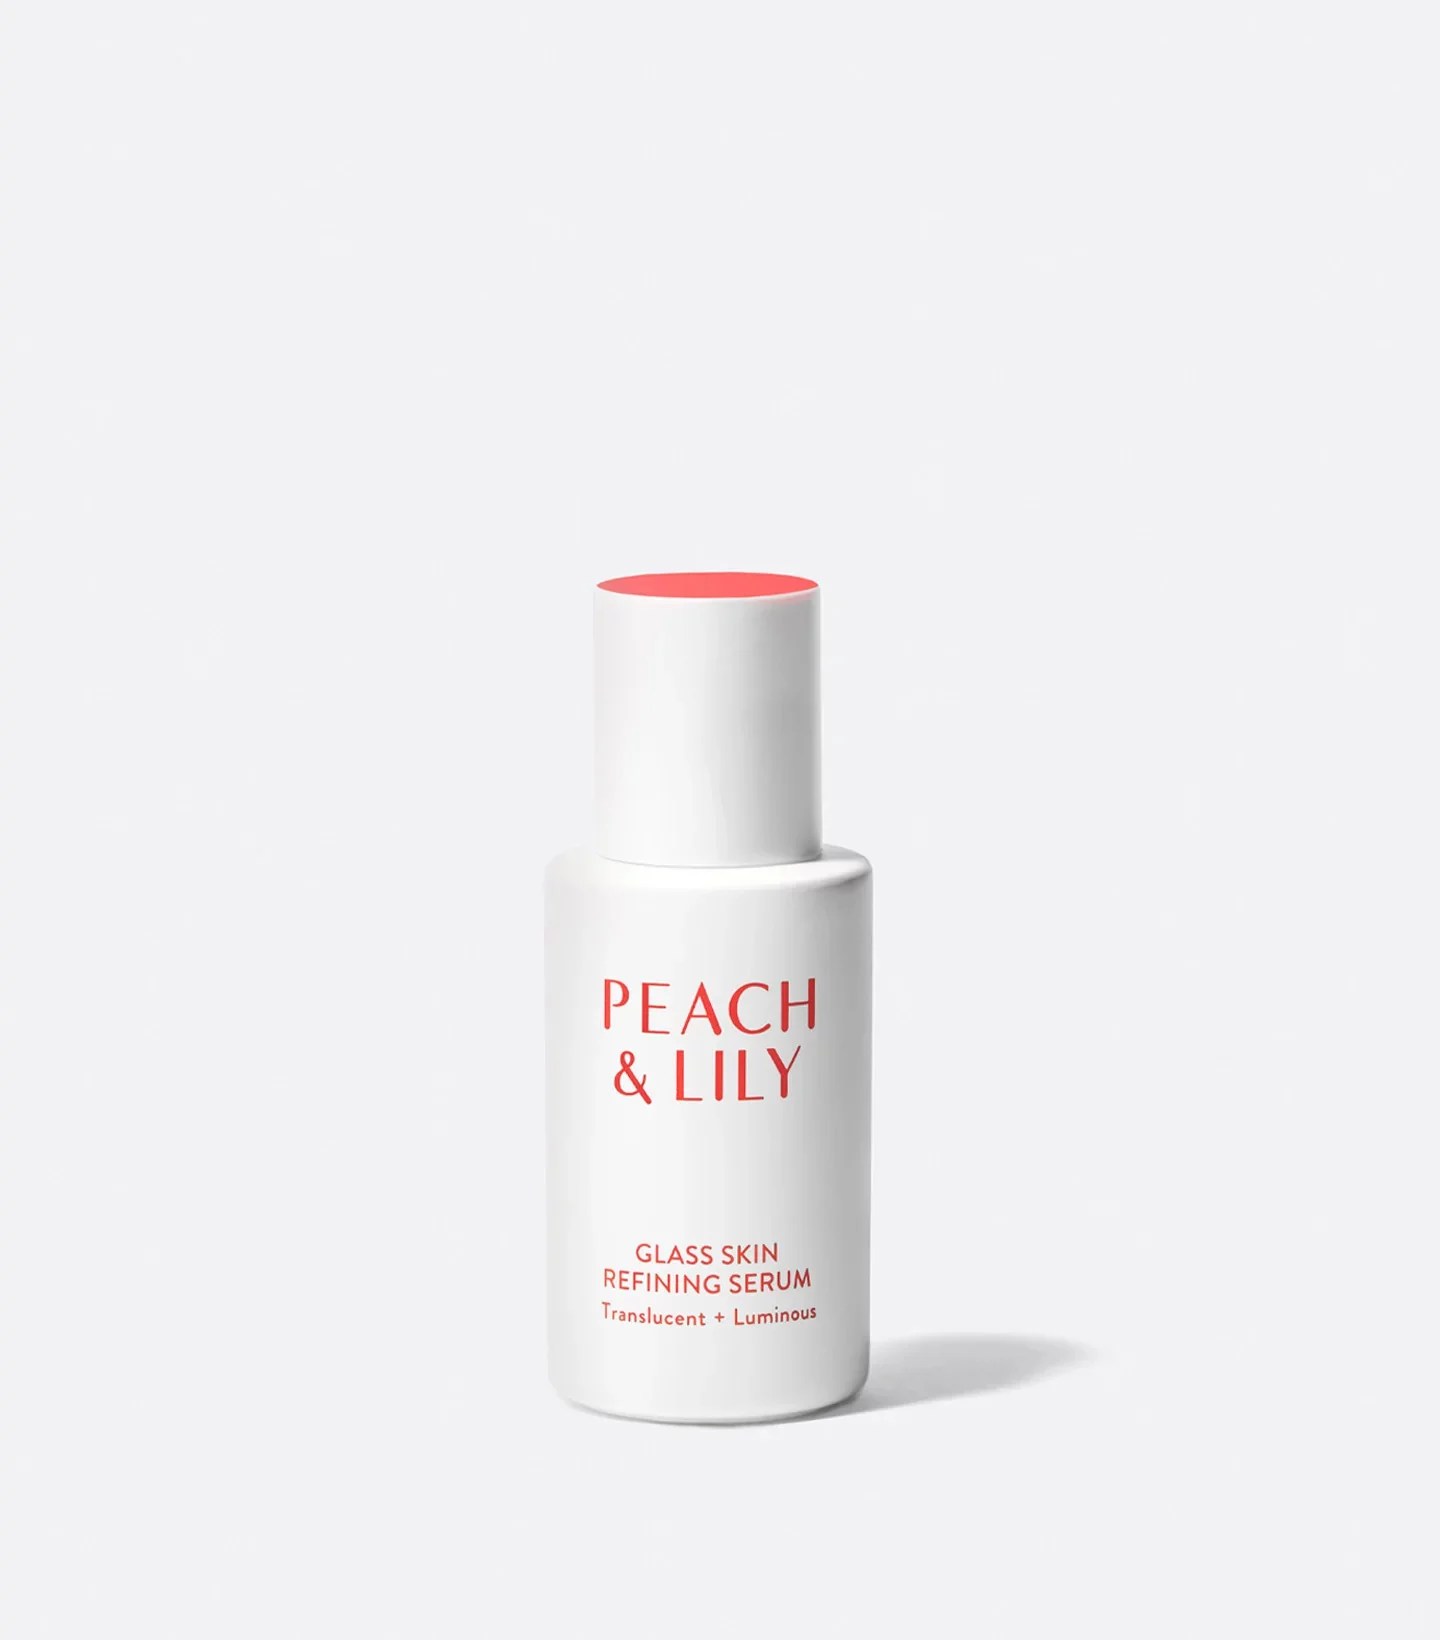 Peach & Lily's New Glass Skin Water-Gel Moisturizer Is for All Skin Types, Review